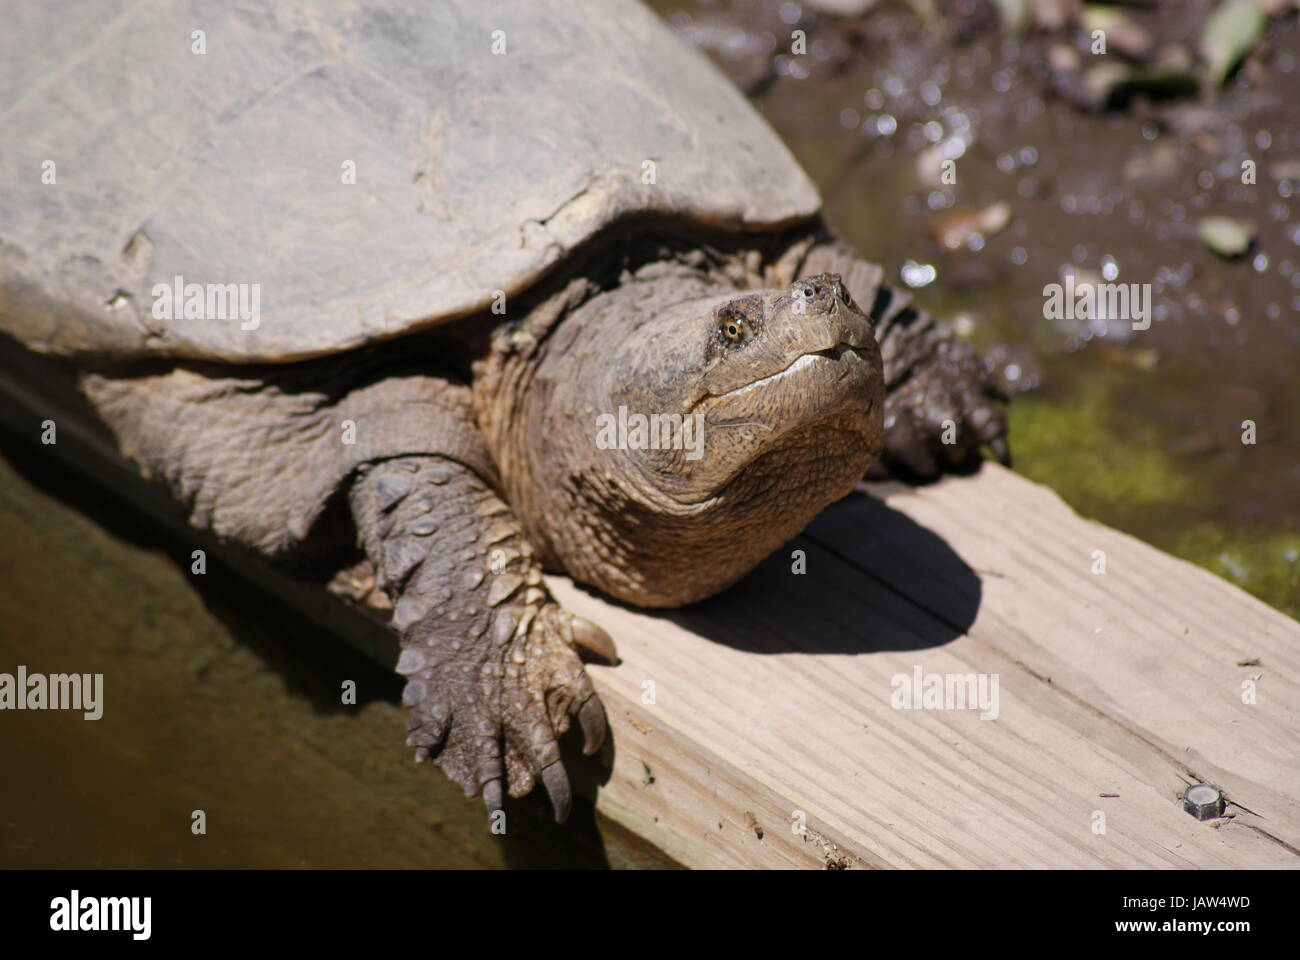 Close up of the face large snapping turtle on the edge of the water looking rather pre-historic.. Stock Photo